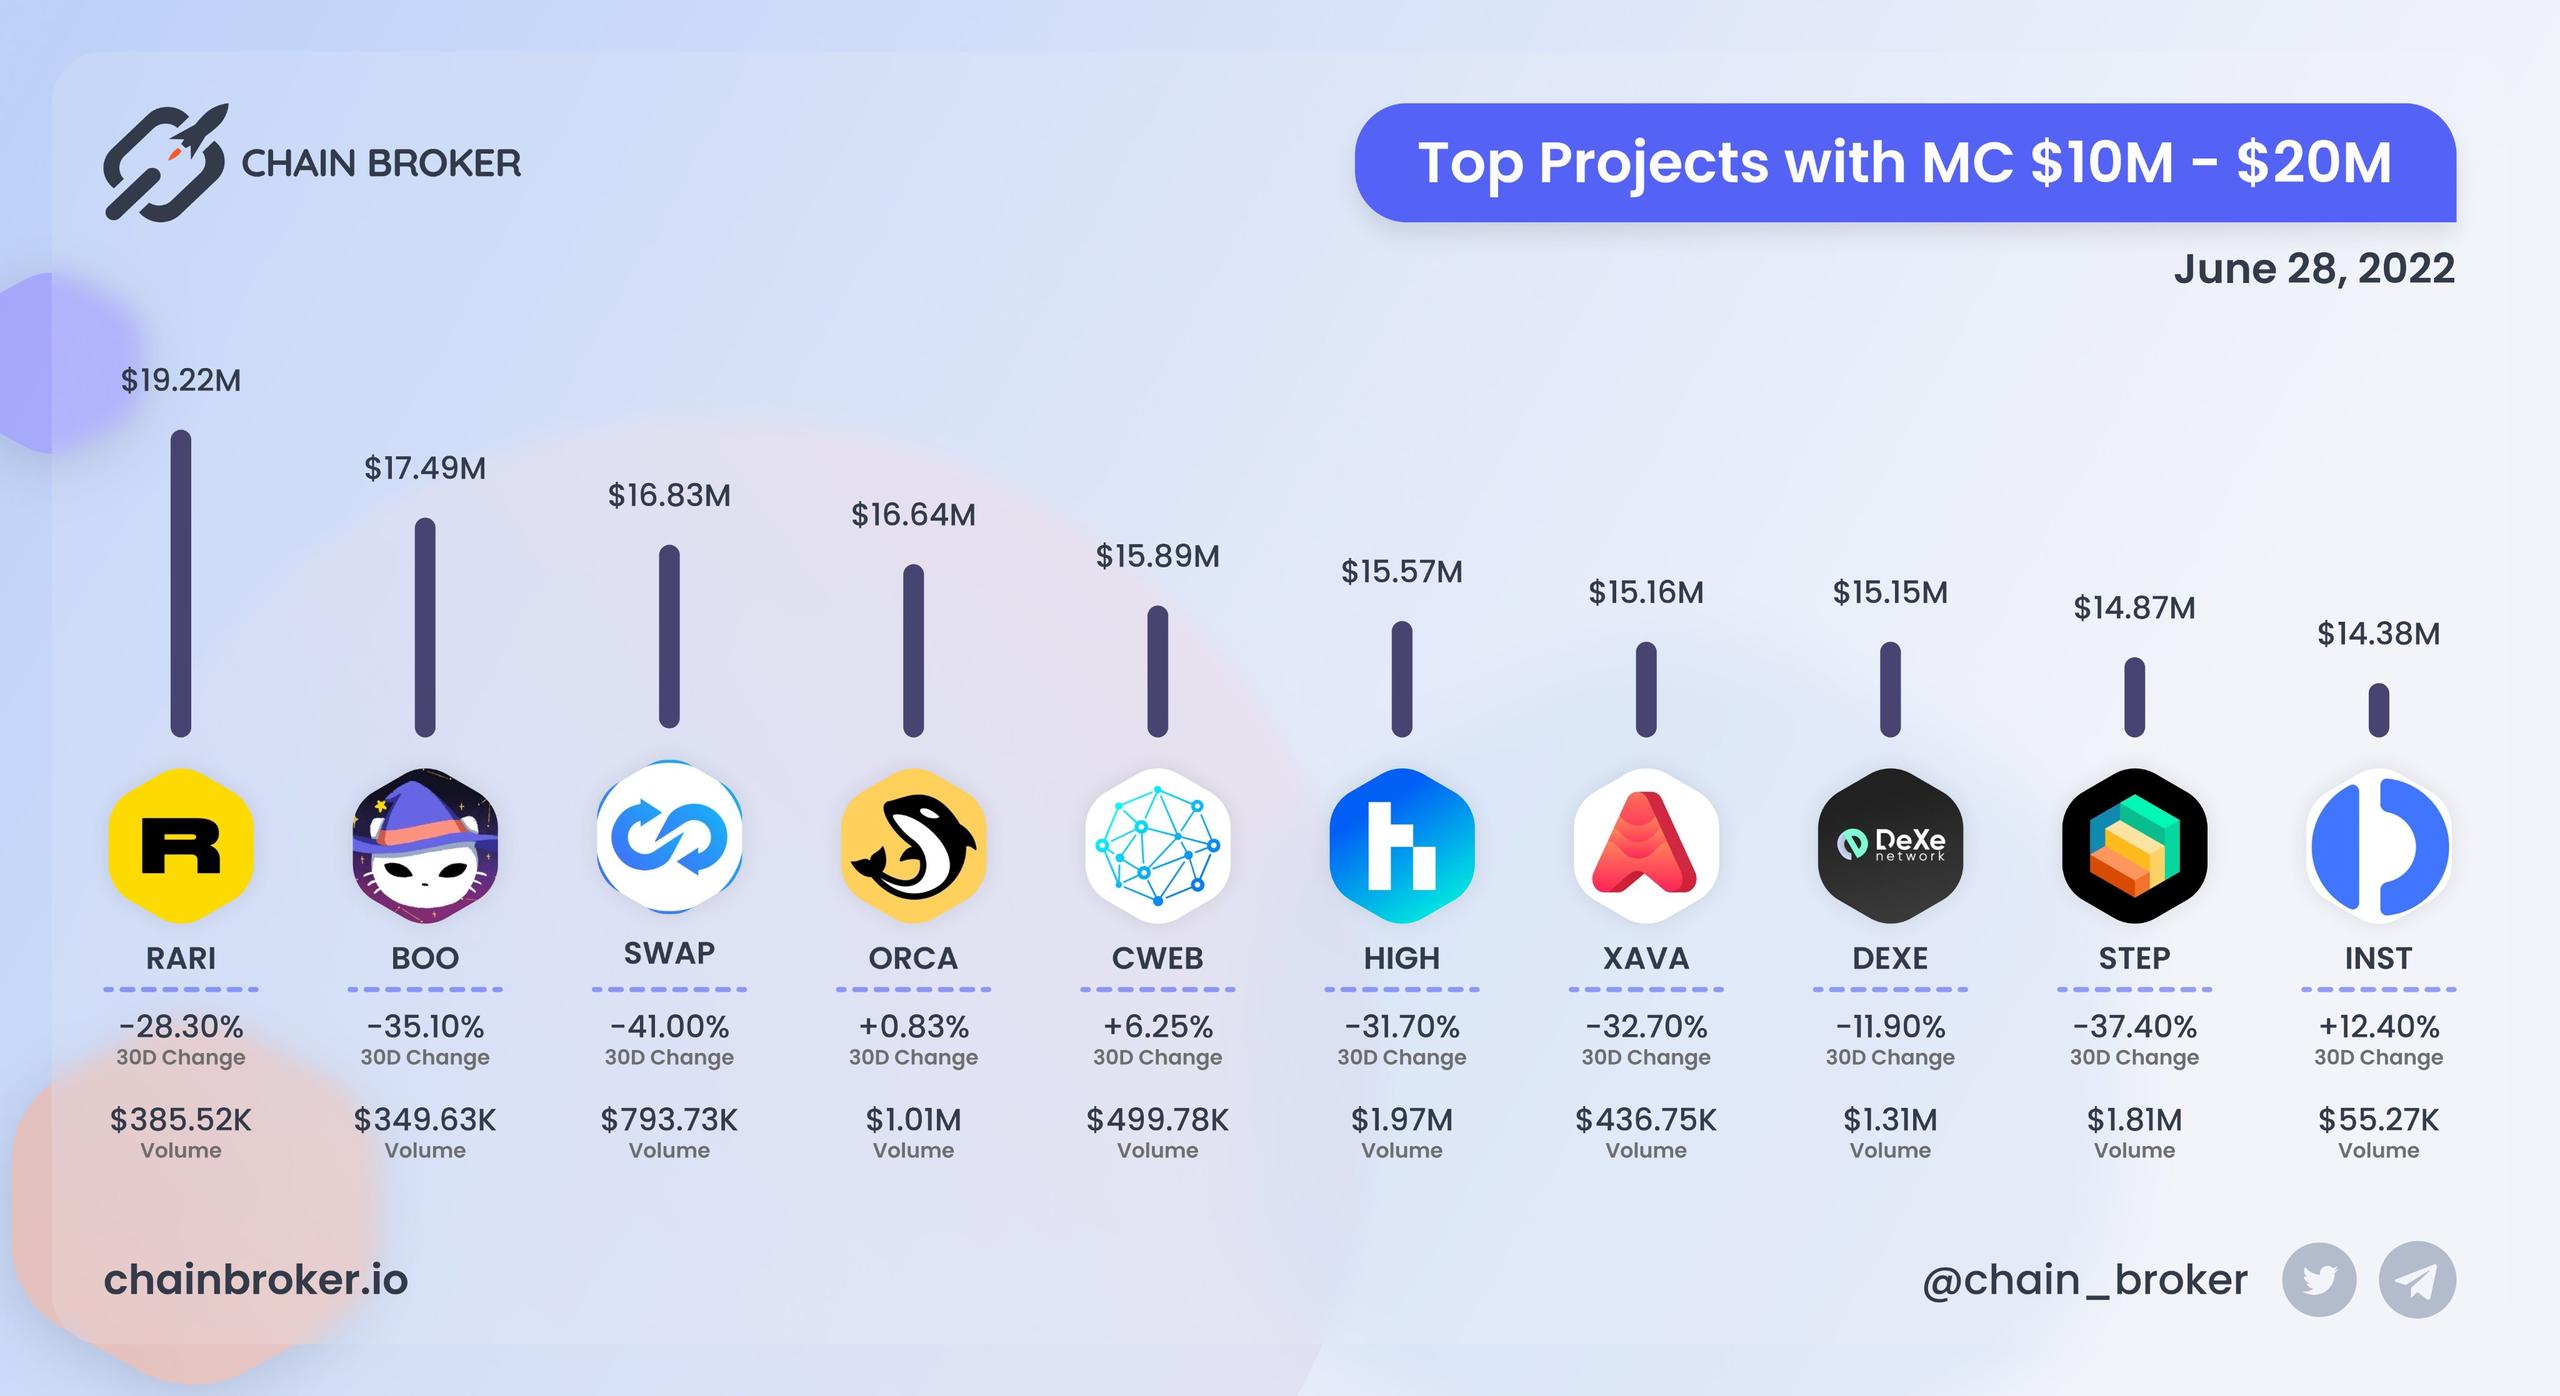 Top projects with Market Cap $10M - $20M